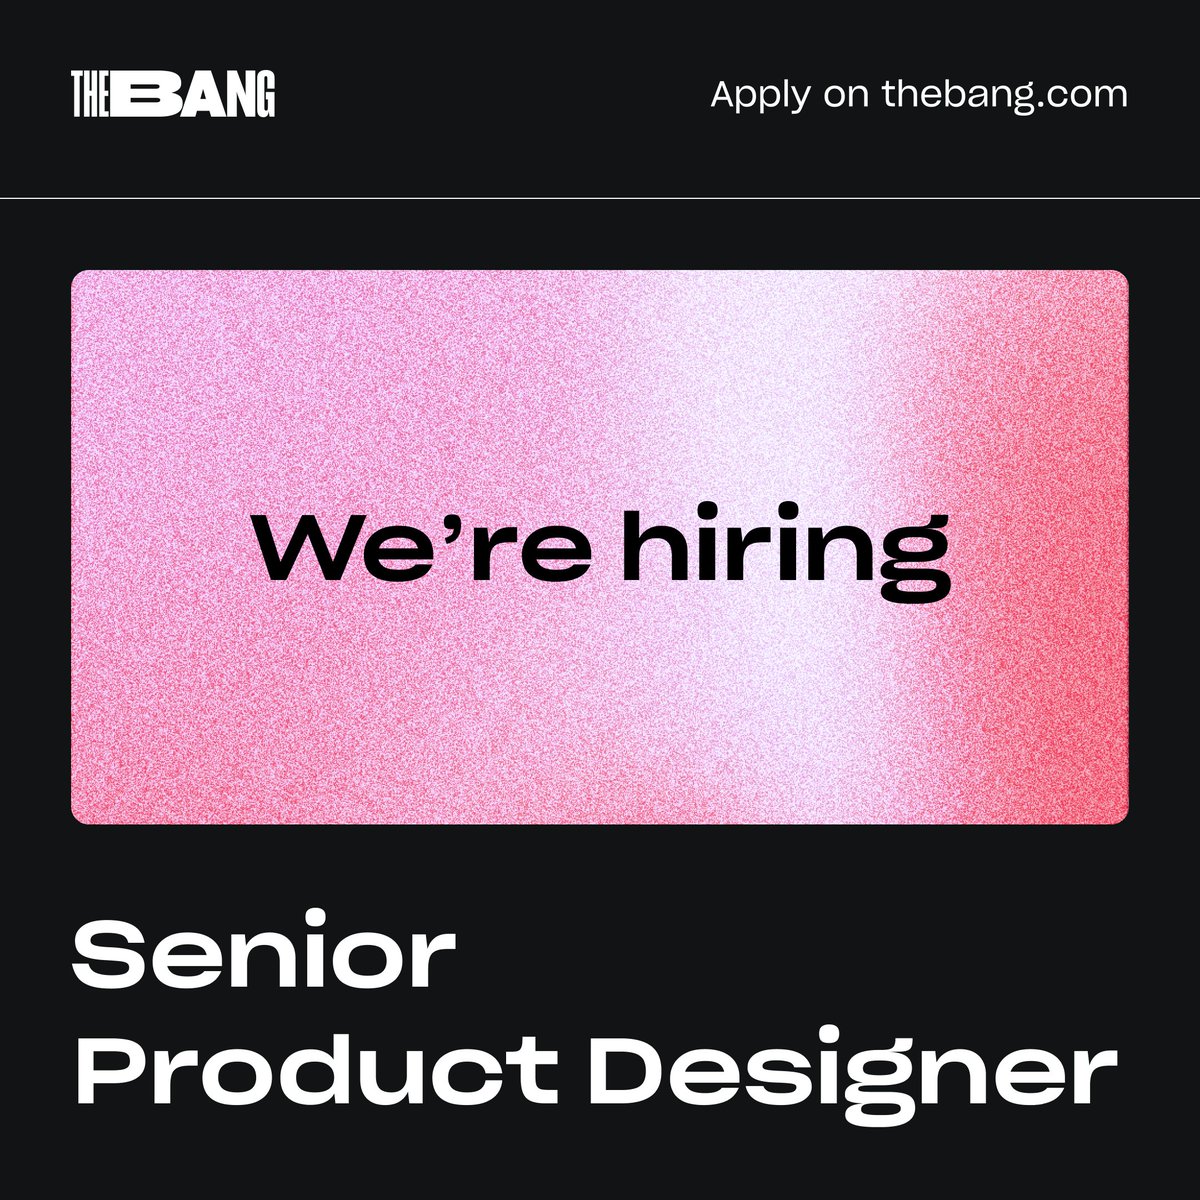 We are hiring! 💥

We have an opening for an experienced Senior UX/UI designer.

If you fit the criteria and would like to be a part of our team of talented designers you can apply now through the link in bio.

We look forward to hearing from you.